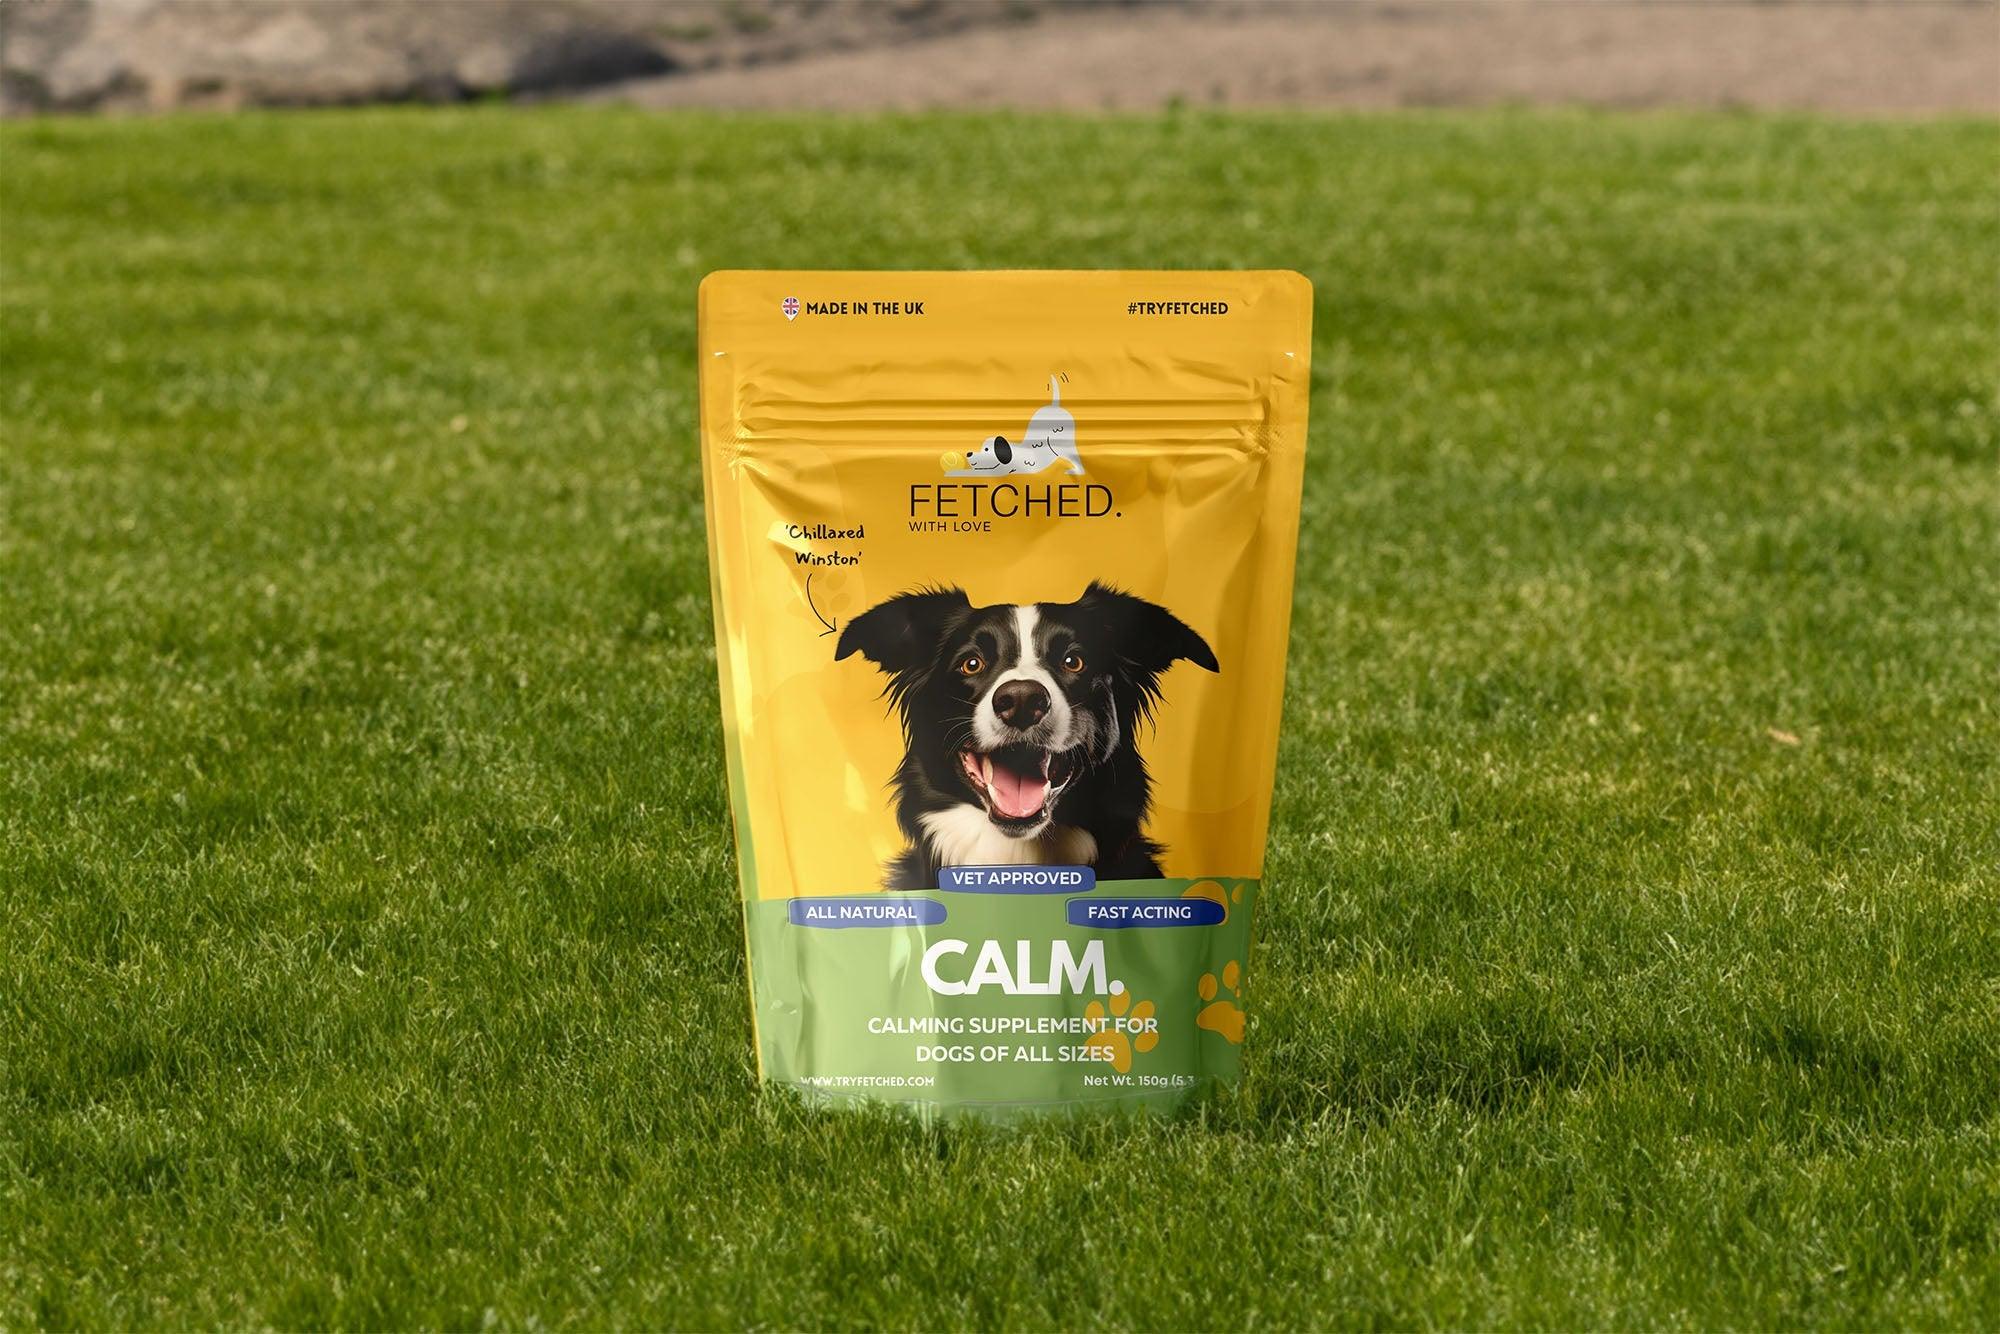 Dog Calming Supplement - Fetched - Dog Calming Tips, Tricks and Other Resources for Dog Owners